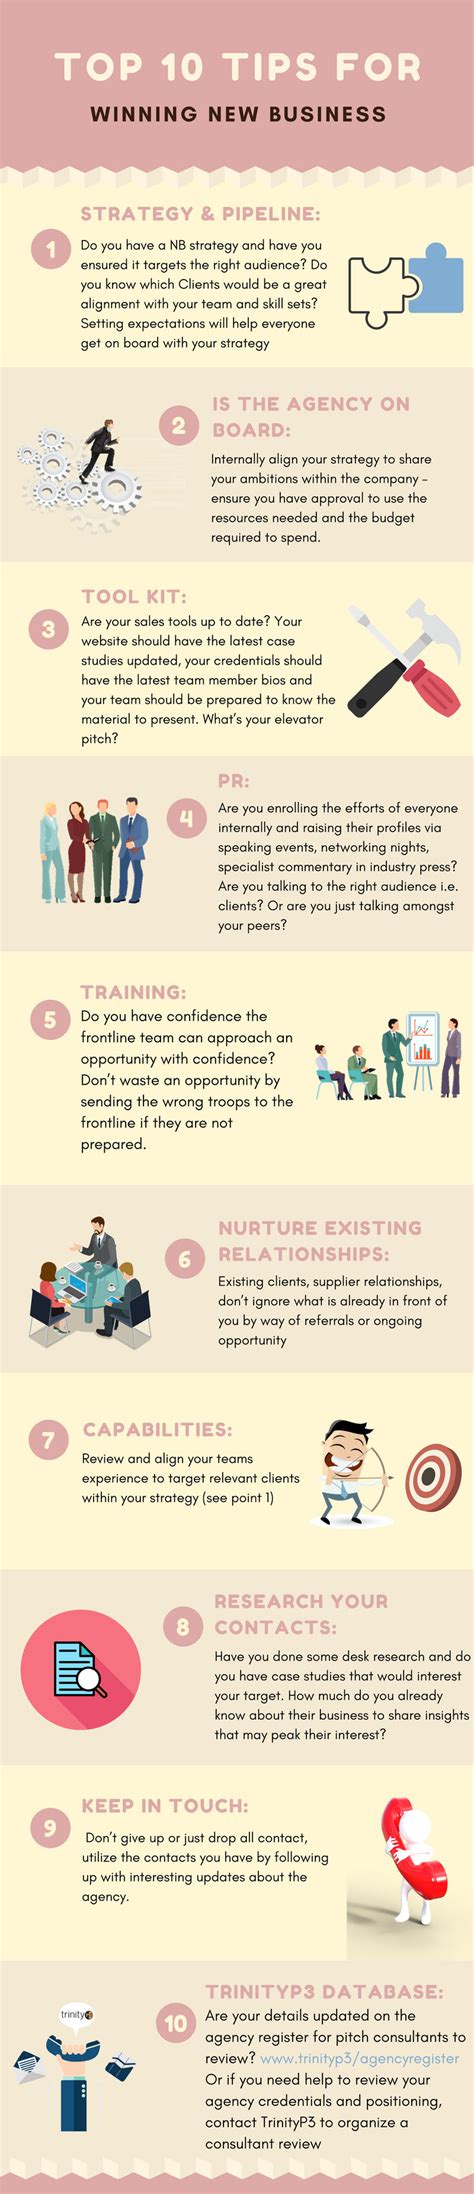 Top 10 Tips For Winning New Business Infographic